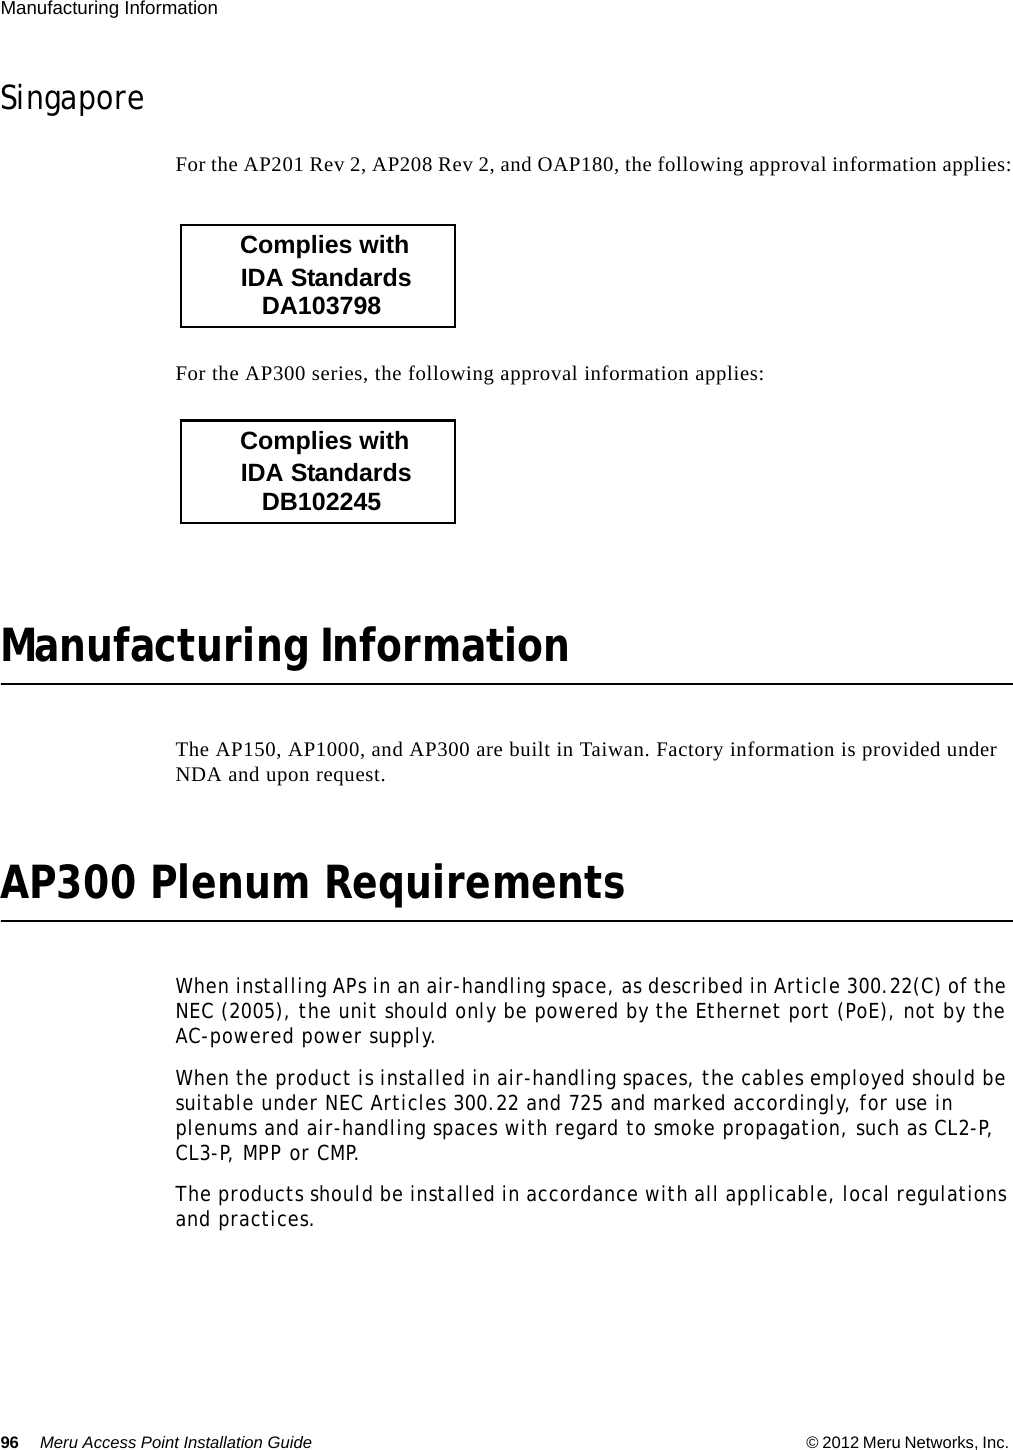 96 Meru Access Point Installation Guide © 2012 Meru Networks, Inc. Manufacturing Information SingaporeFor the AP201 Rev 2, AP208 Rev 2, and OAP180, the following approval information applies:For the AP300 series, the following approval information applies:Manufacturing InformationThe AP150, AP1000, and AP300 are built in Taiwan. Factory information is provided under NDA and upon request.AP300 Plenum RequirementsWhen installing APs in an air-handling space, as described in Article 300.22(C) of the NEC (2005), the unit should only be powered by the Ethernet port (PoE), not by the AC-powered power supply.When the product is installed in air-handling spaces, the cables employed should be suitable under NEC Articles 300.22 and 725 and marked accordingly, for use in plenums and air-handling spaces with regard to smoke propagation, such as CL2-P, CL3 -P,  MPP  or  CM P.The products should be installed in accordance with all applicable, local regulations and practices.           DA103798        IDA Standards       Complies with           DB102245        IDA Standards       Complies with